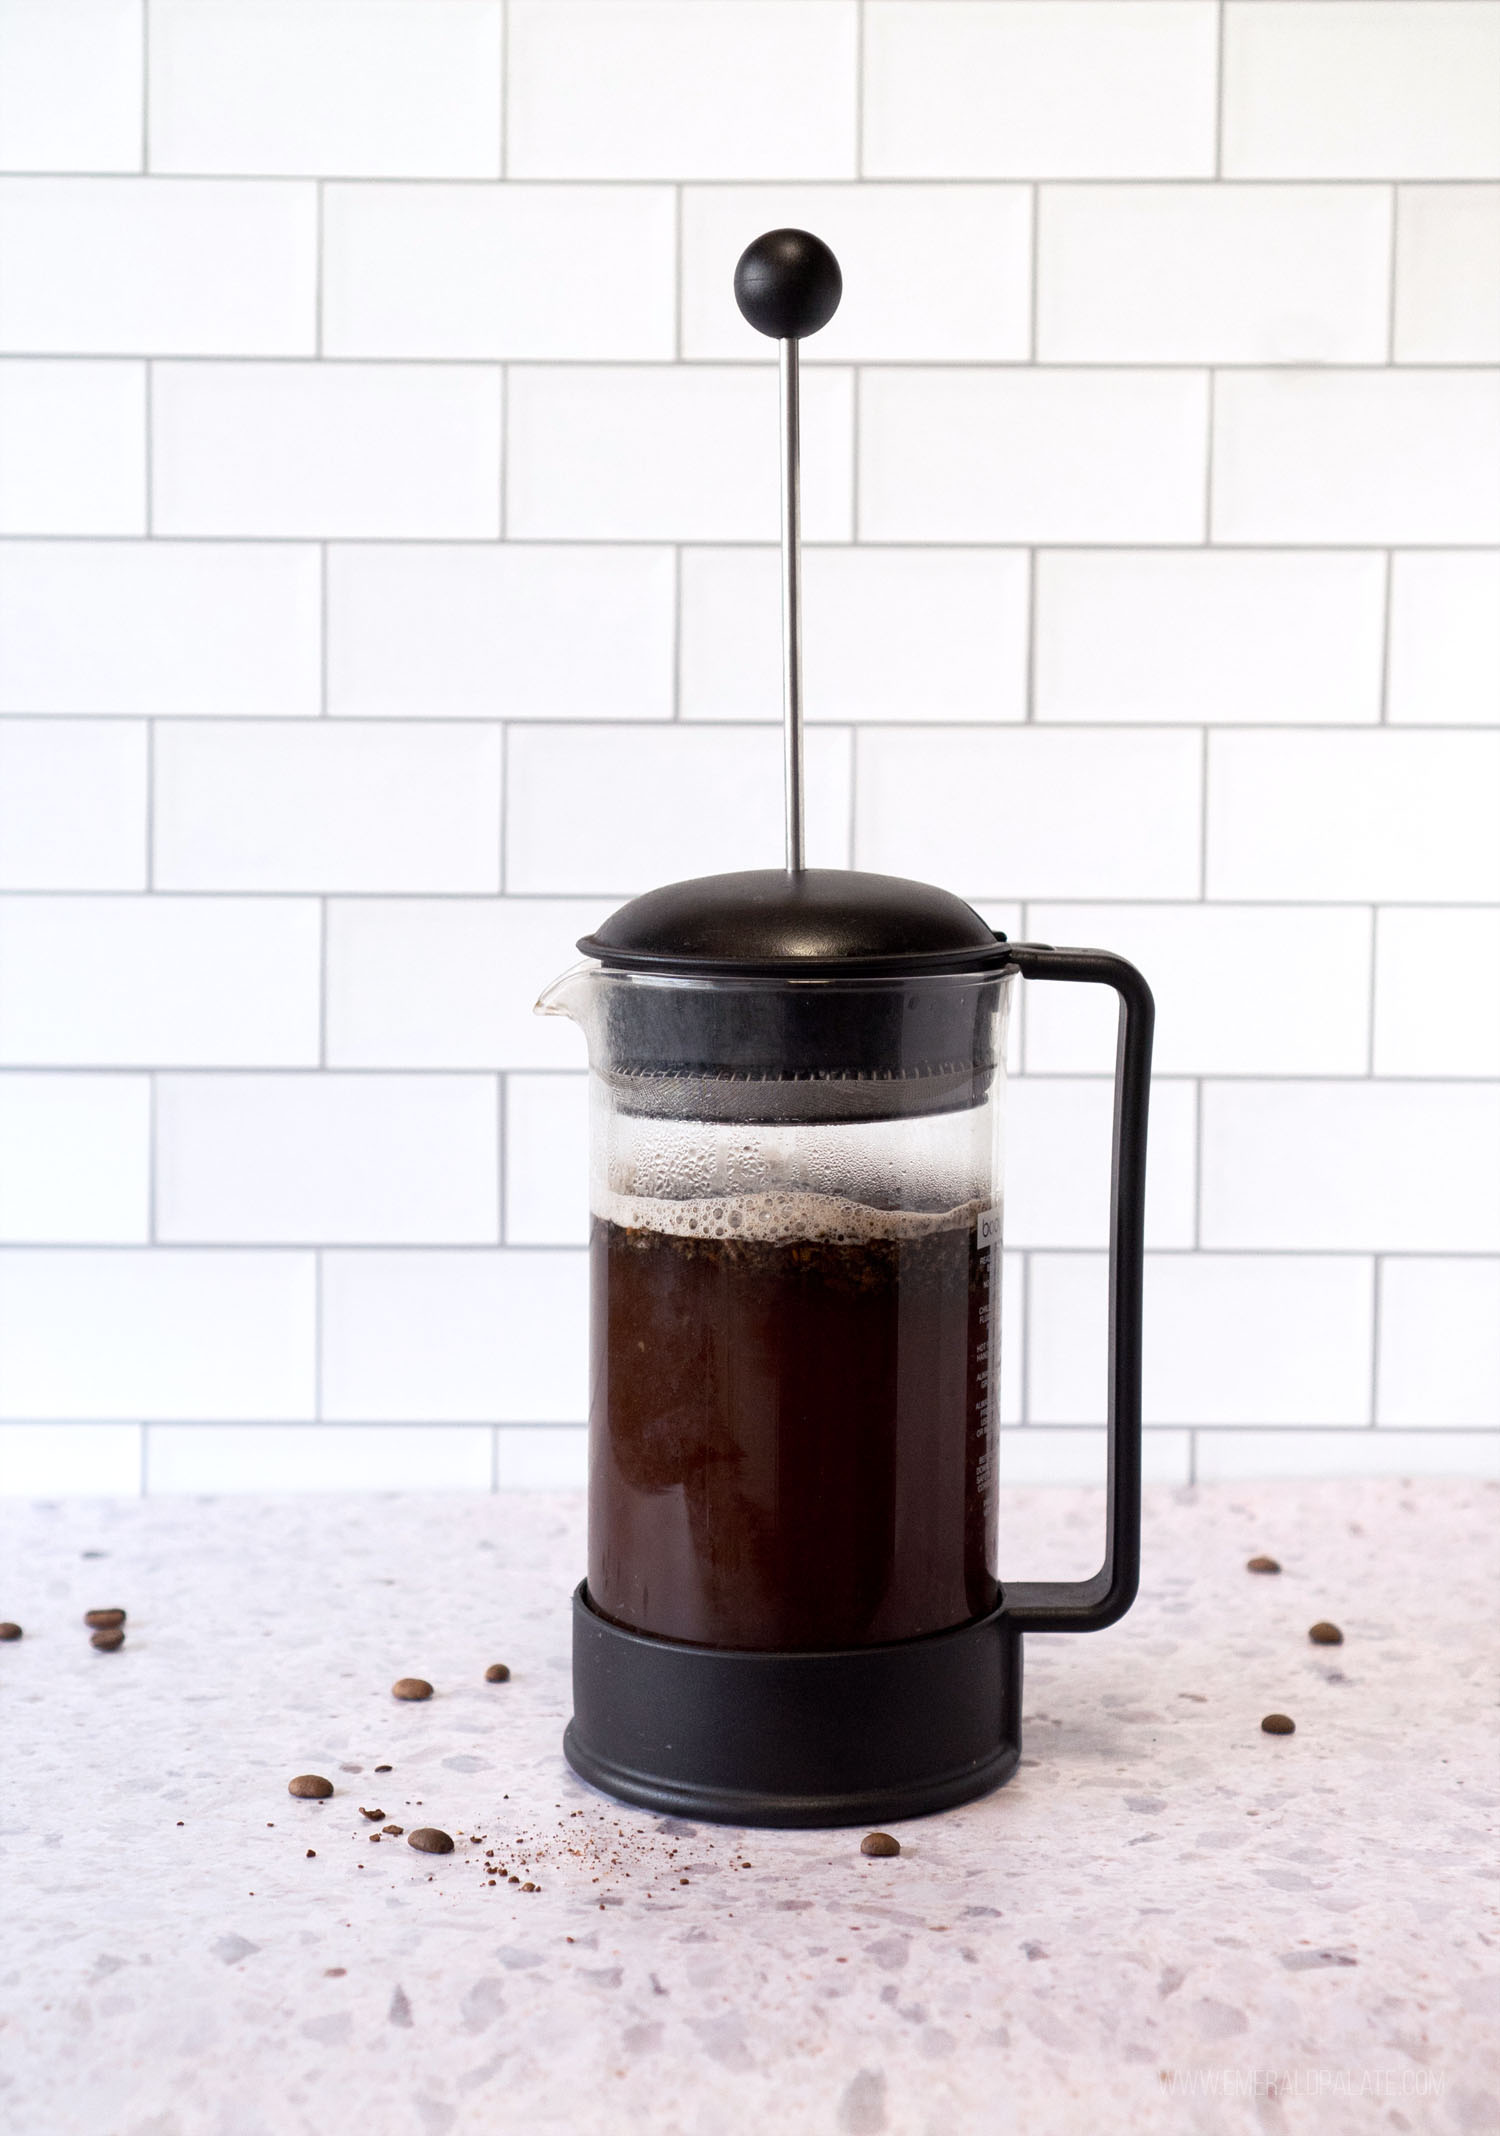 How To Use A French Press: Image Guide and Ratios (Updated)